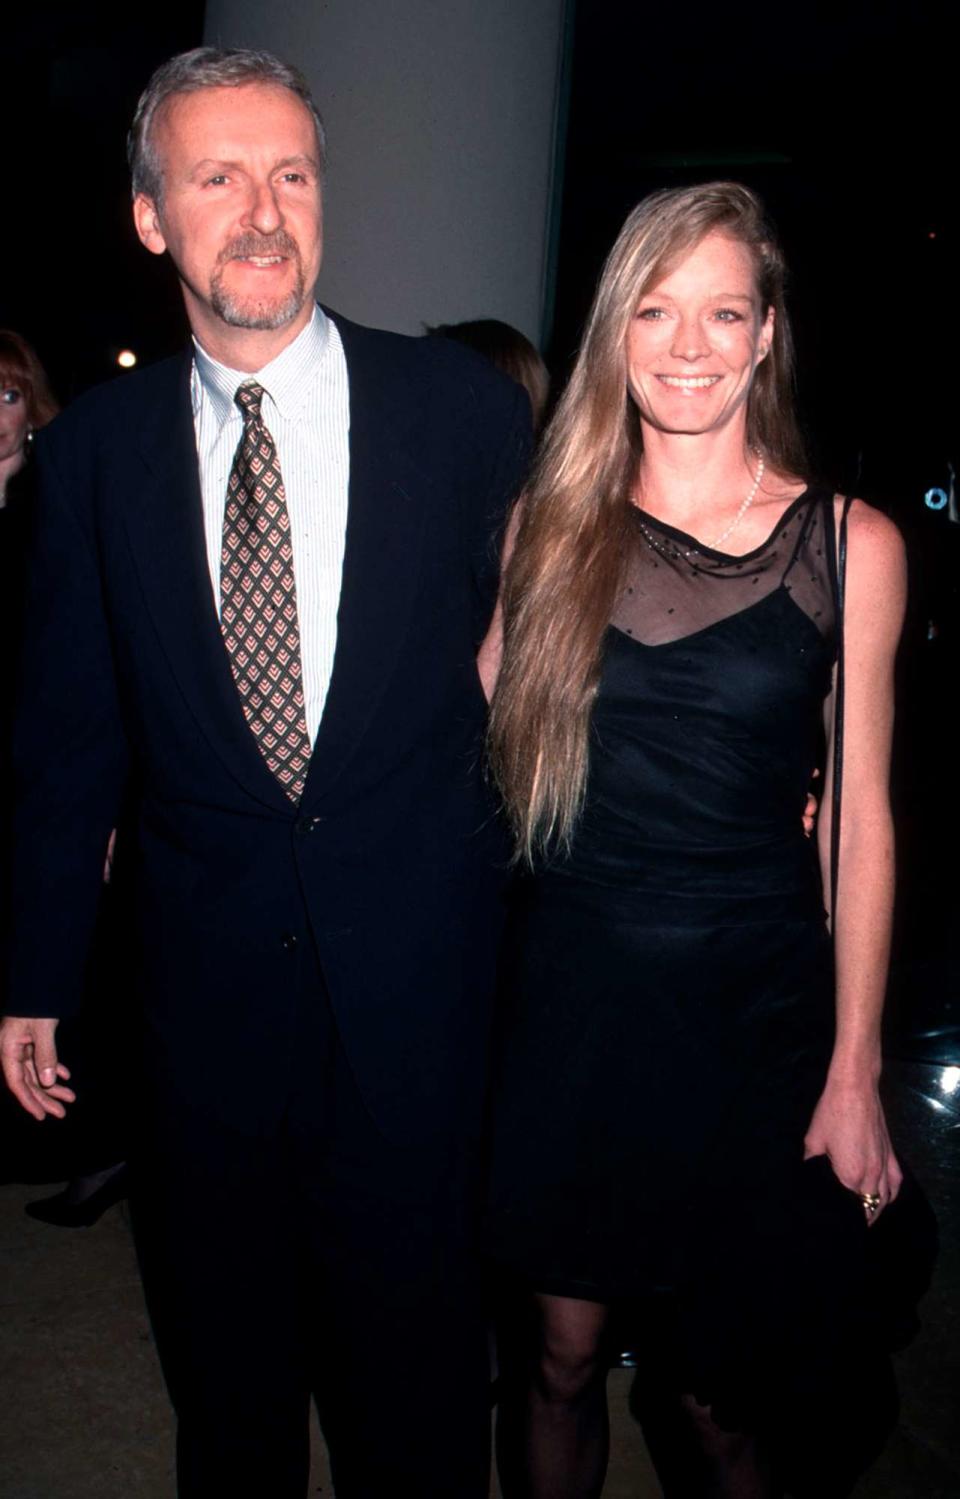 James Cameron with Suzy Amis at the 13th Annual American Cinematheque Awards, honoring Arnold Schwarzenegger in Los Angeles, CA, October 18, 1998.